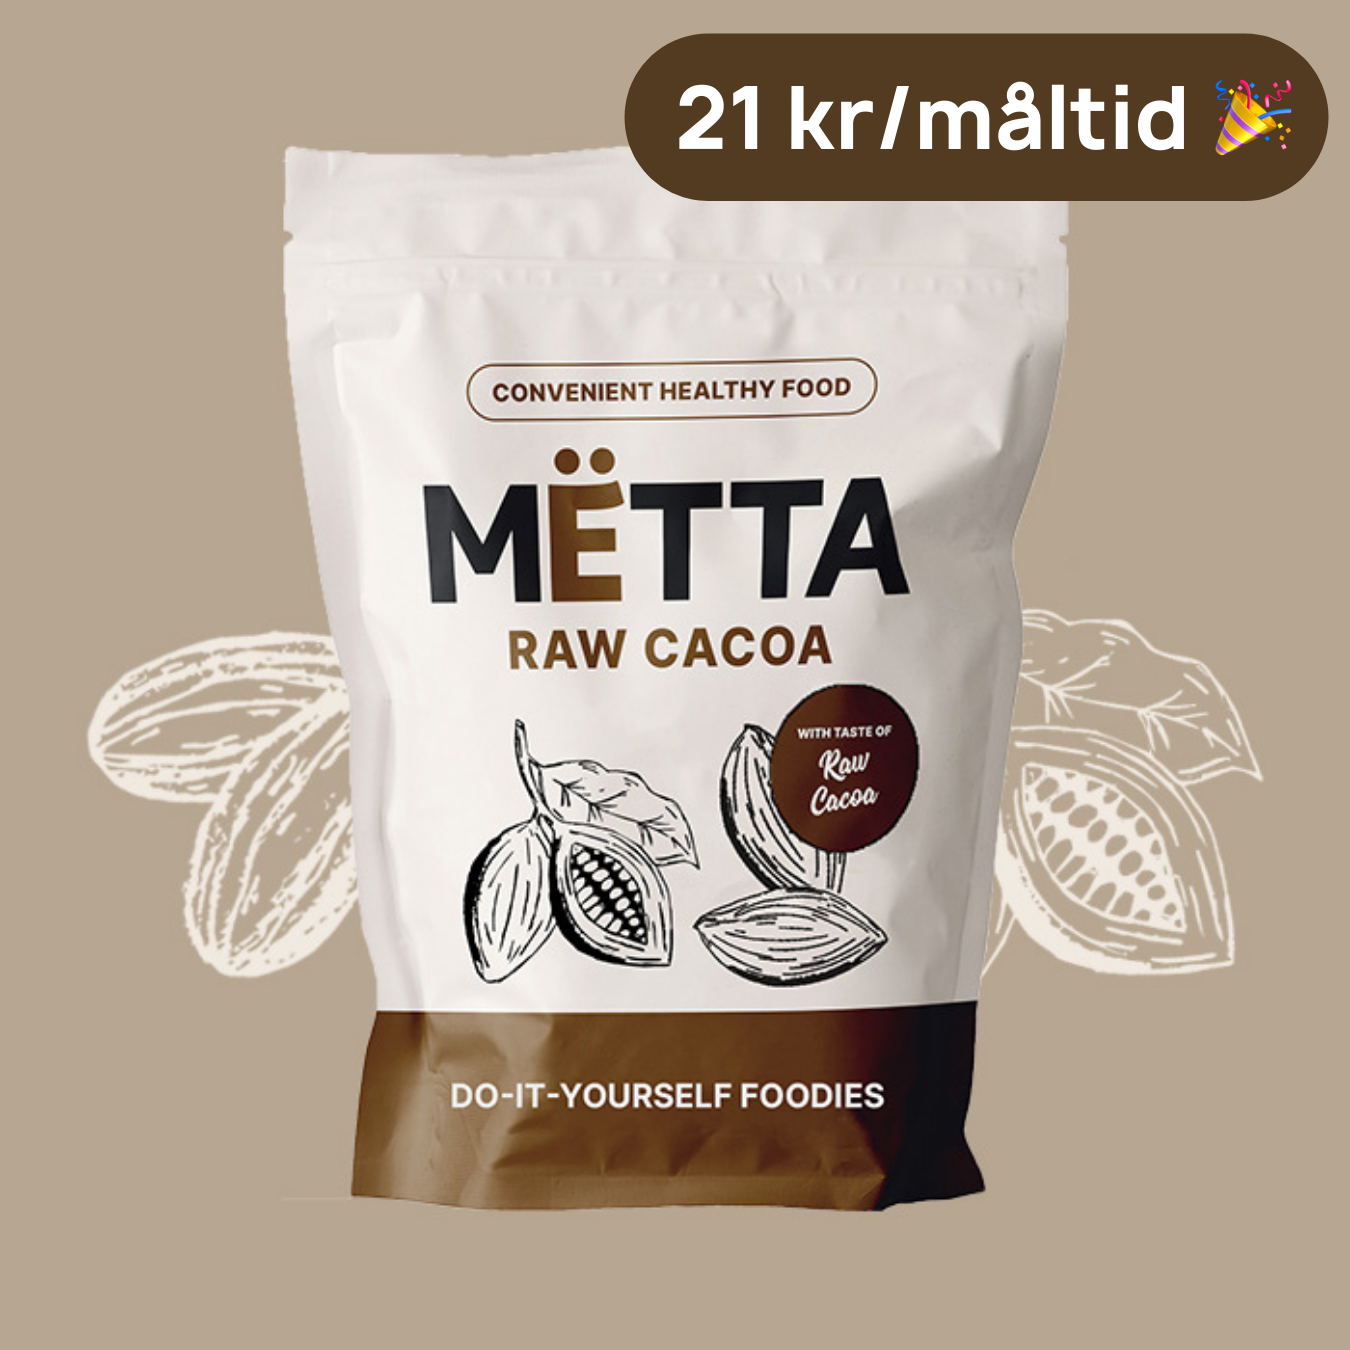 New Raw Cacao